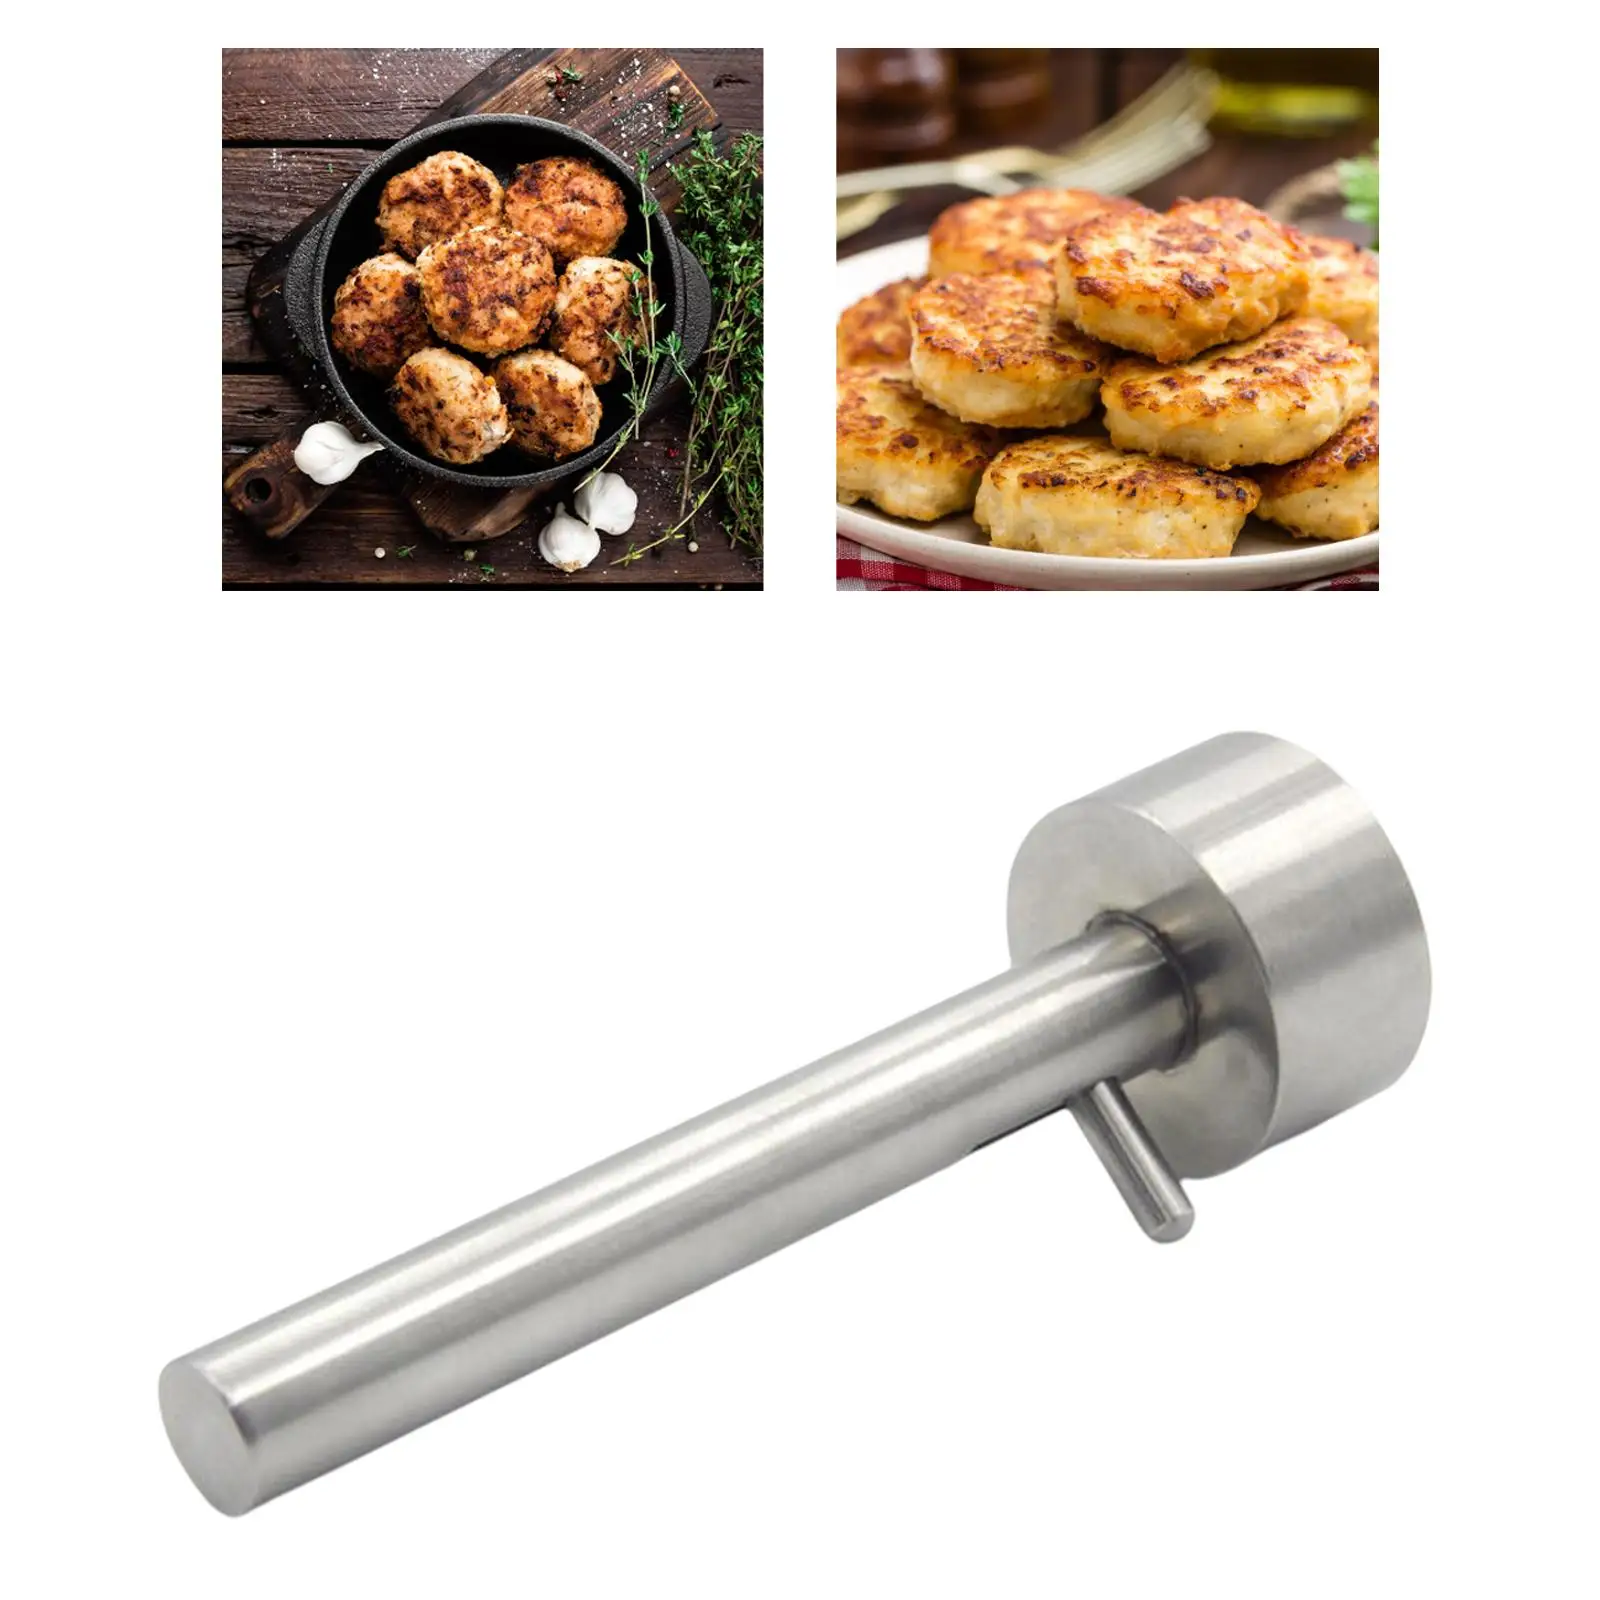 Handheld Meatball Making Tool Multifunctional Homemade Fast Filling Tool Detachable Manual for Household Restaurant Kitchen BBQ